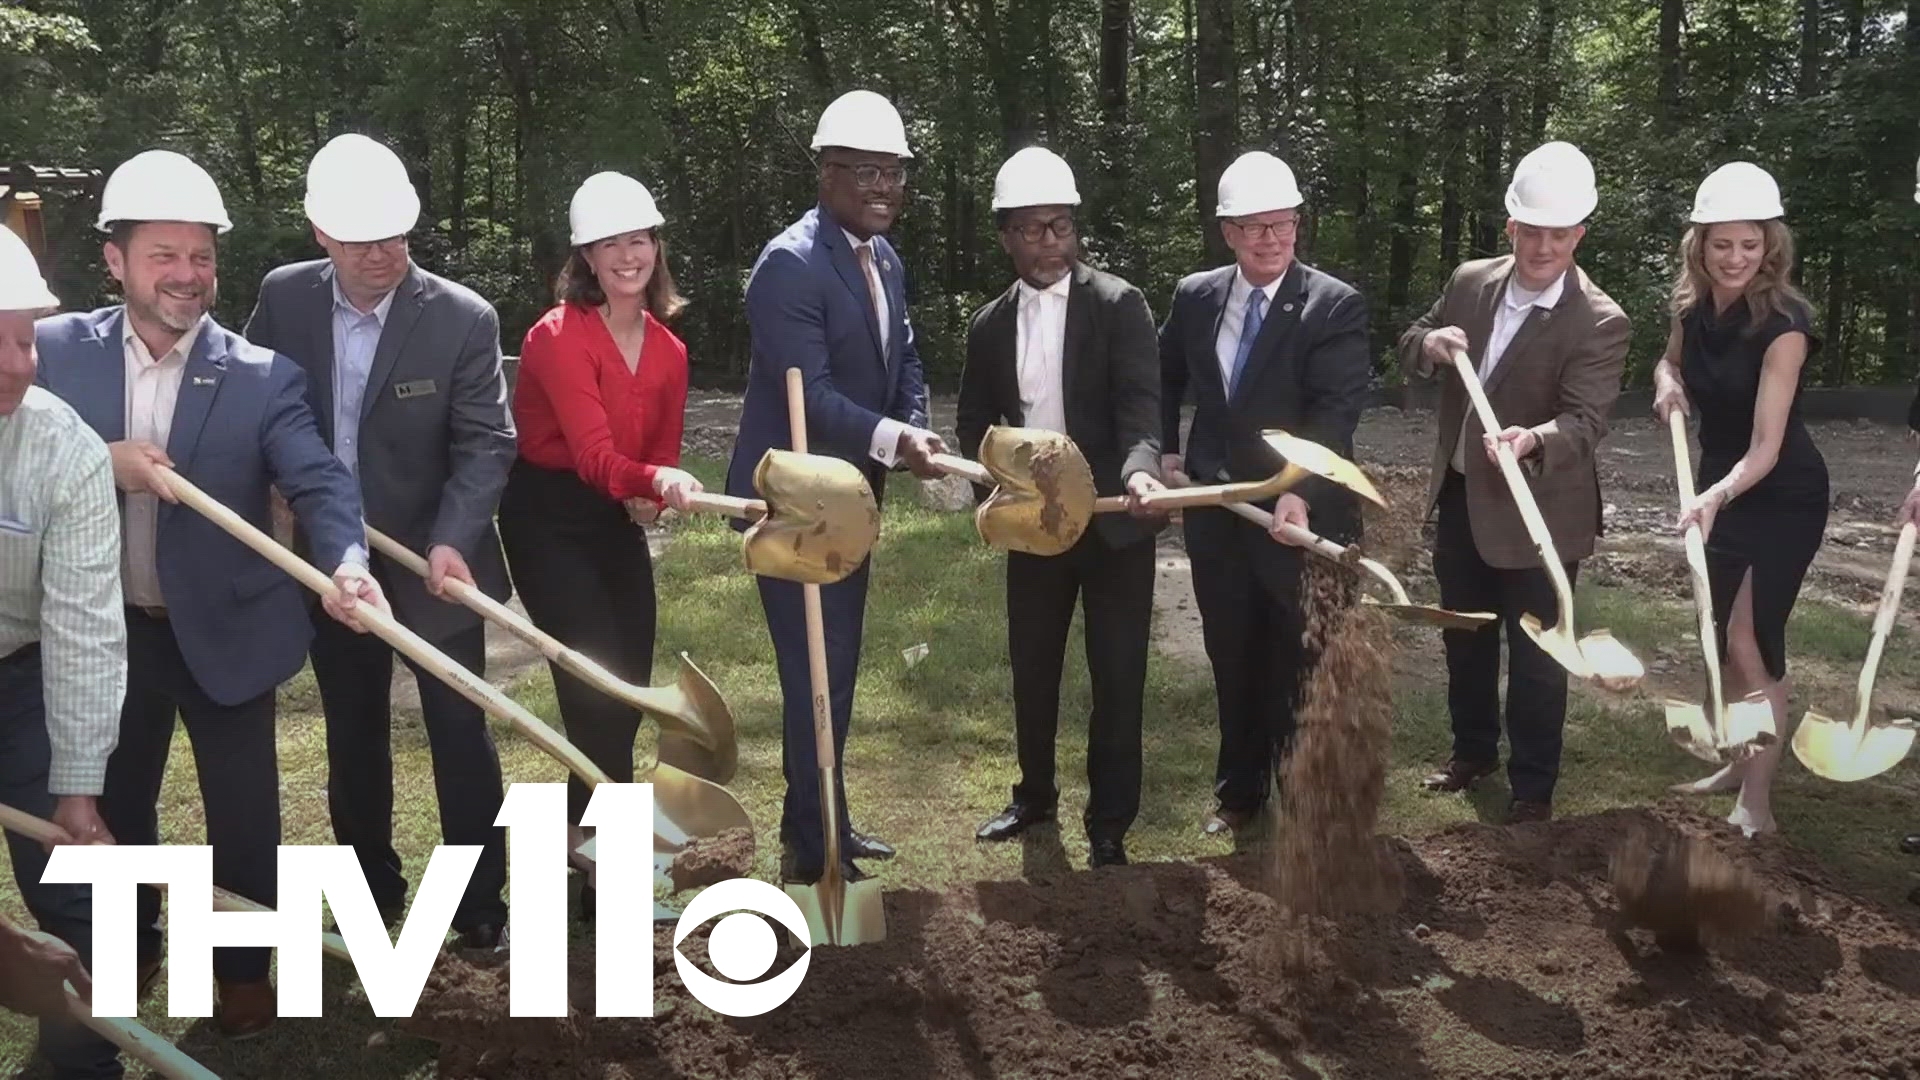 Pulaski County leaders put on their hard hats on Tuesday, breaking ground on the state's first of its kind village to house the homeless.